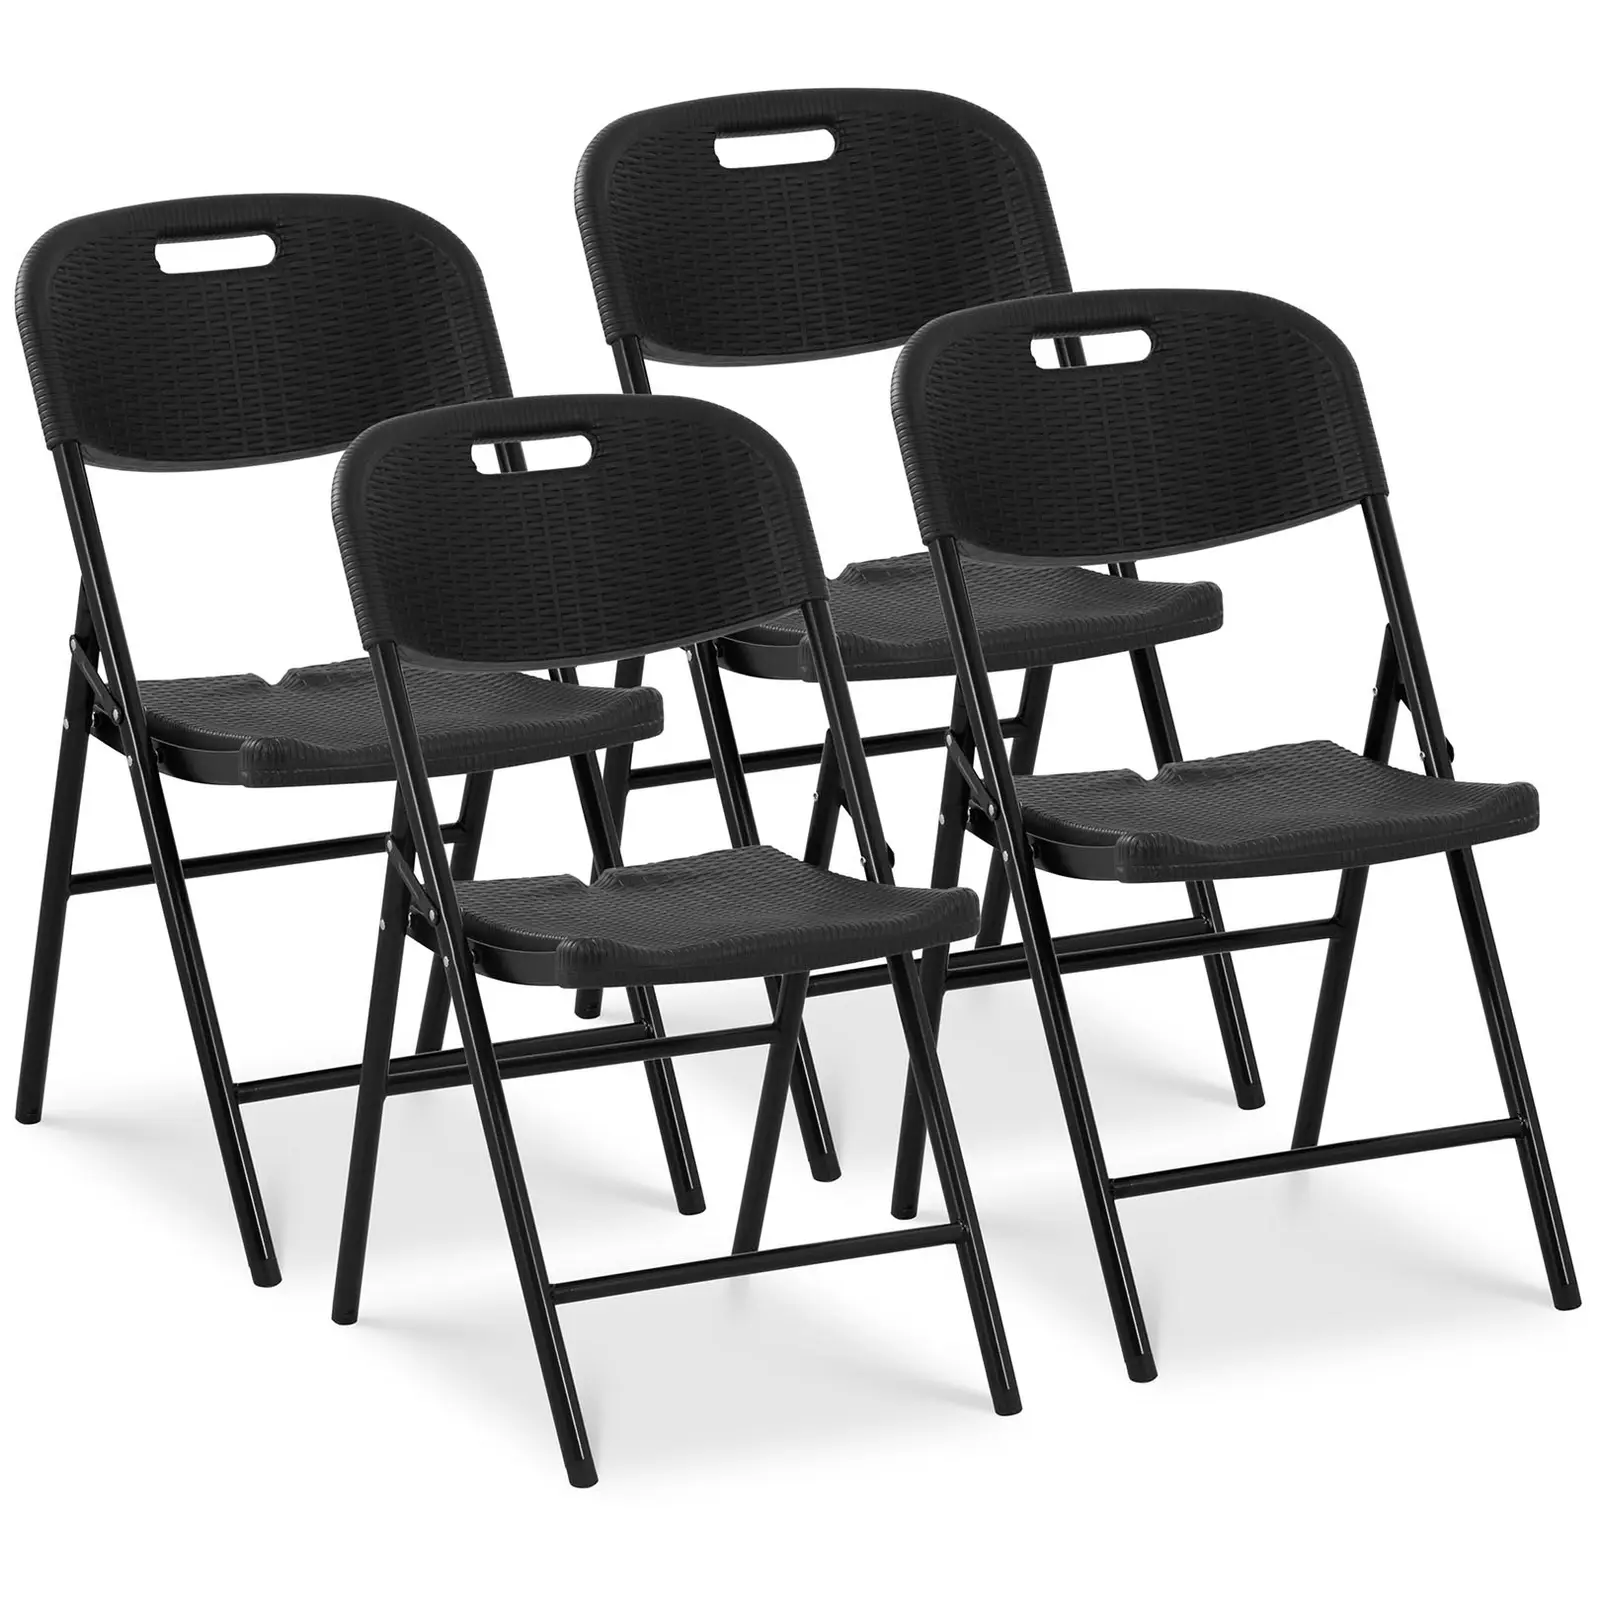 Folding Chairs - set of 4 - Royal Catering - 180 kg - seat area: 52 x 36 cm - black